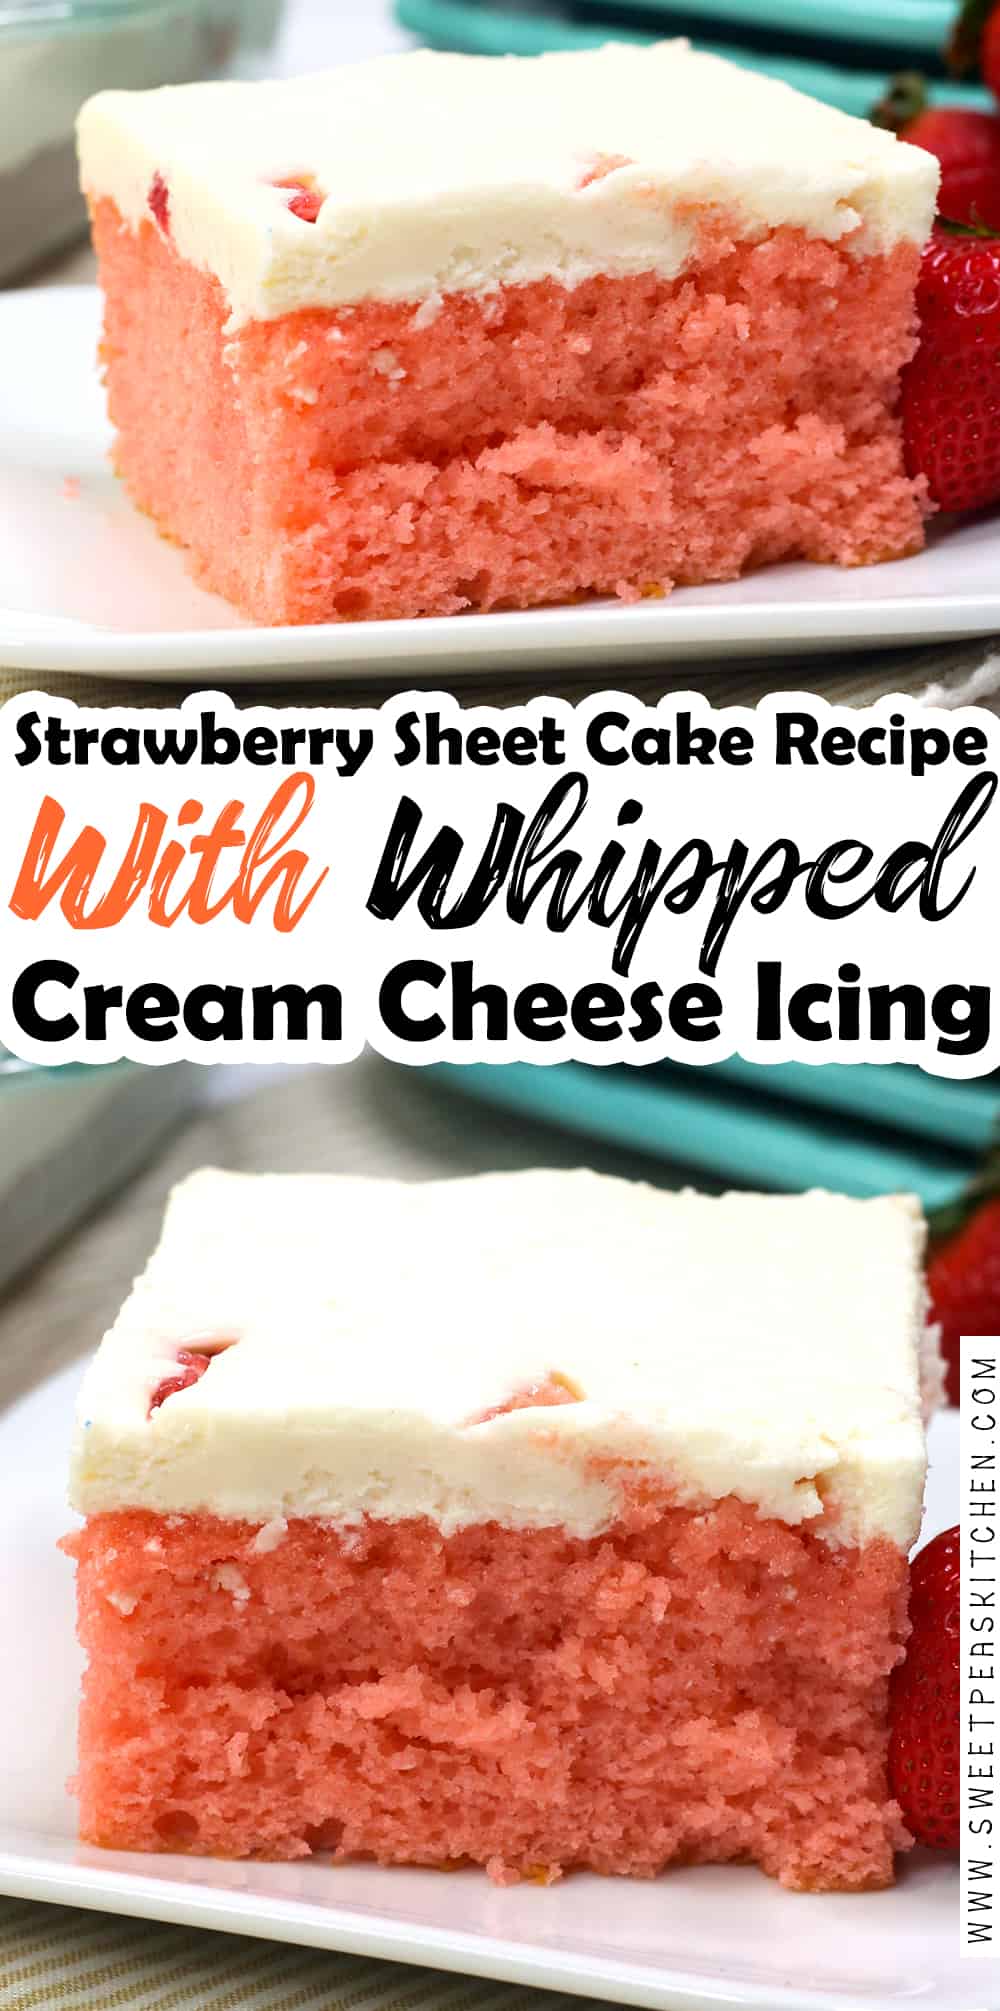 Strawberry Sheet Cake Recipe with Whipped Cream Cheese Icing